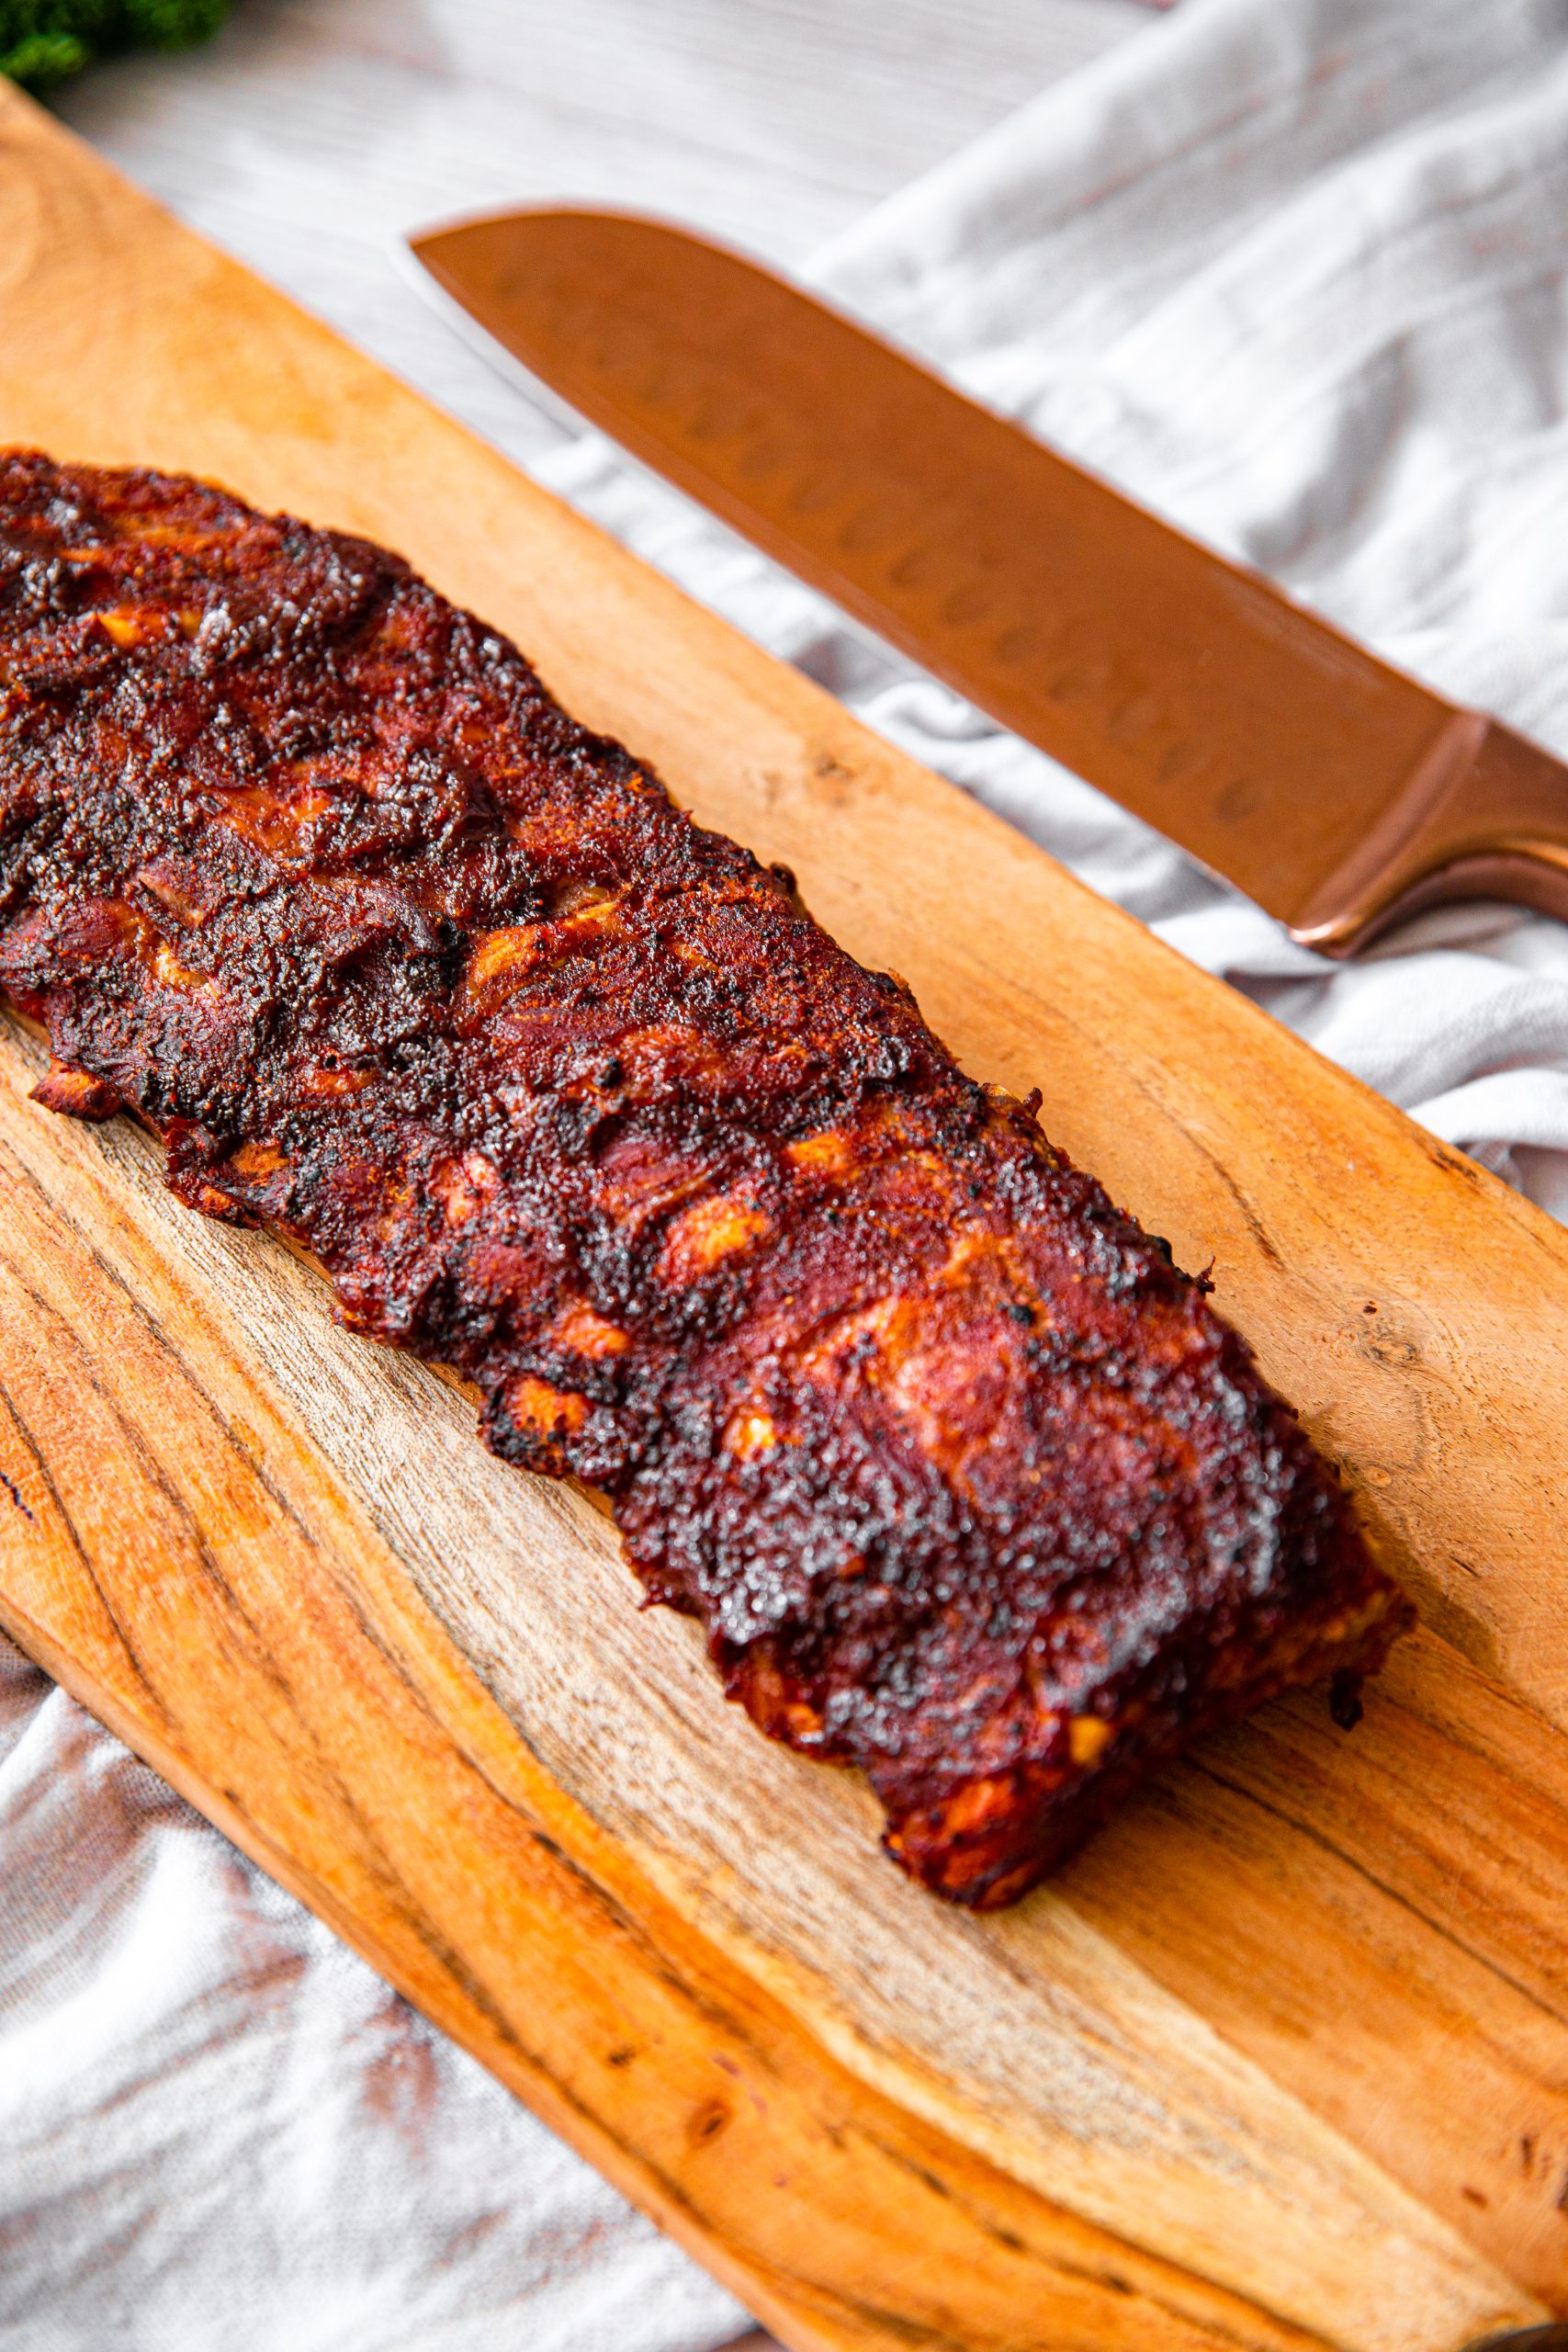  Ribs should take 2-4 hours depending on the size. Keep checking and stop when the meat is tender and juicy.